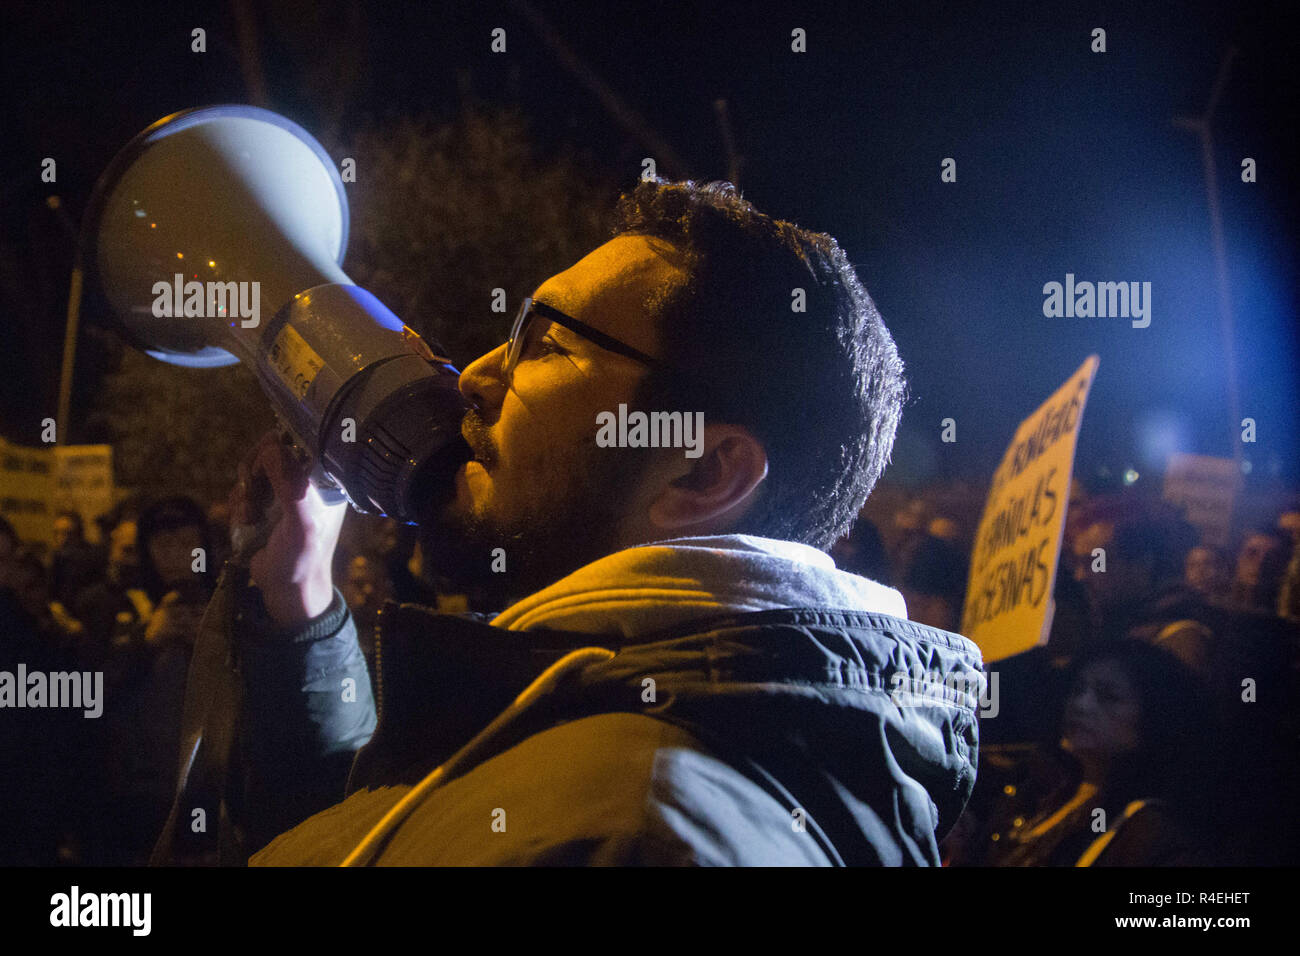 Madrid, Spain. 27th Nov, 2018. A protester seen shouting for the closure of the Immigration Detention Centres on a megaphone during the protest.Demonstration was held in front of the Immigration Detention Centre to demand for the closure of this centre and the rest in Europe for treating undocumented immigrants as criminals, depriving them of freedom, against Human Rights and for the racist treatment in them. Credit: Lito Lizana/SOPA Images/ZUMA Wire/Alamy Live News Stock Photo